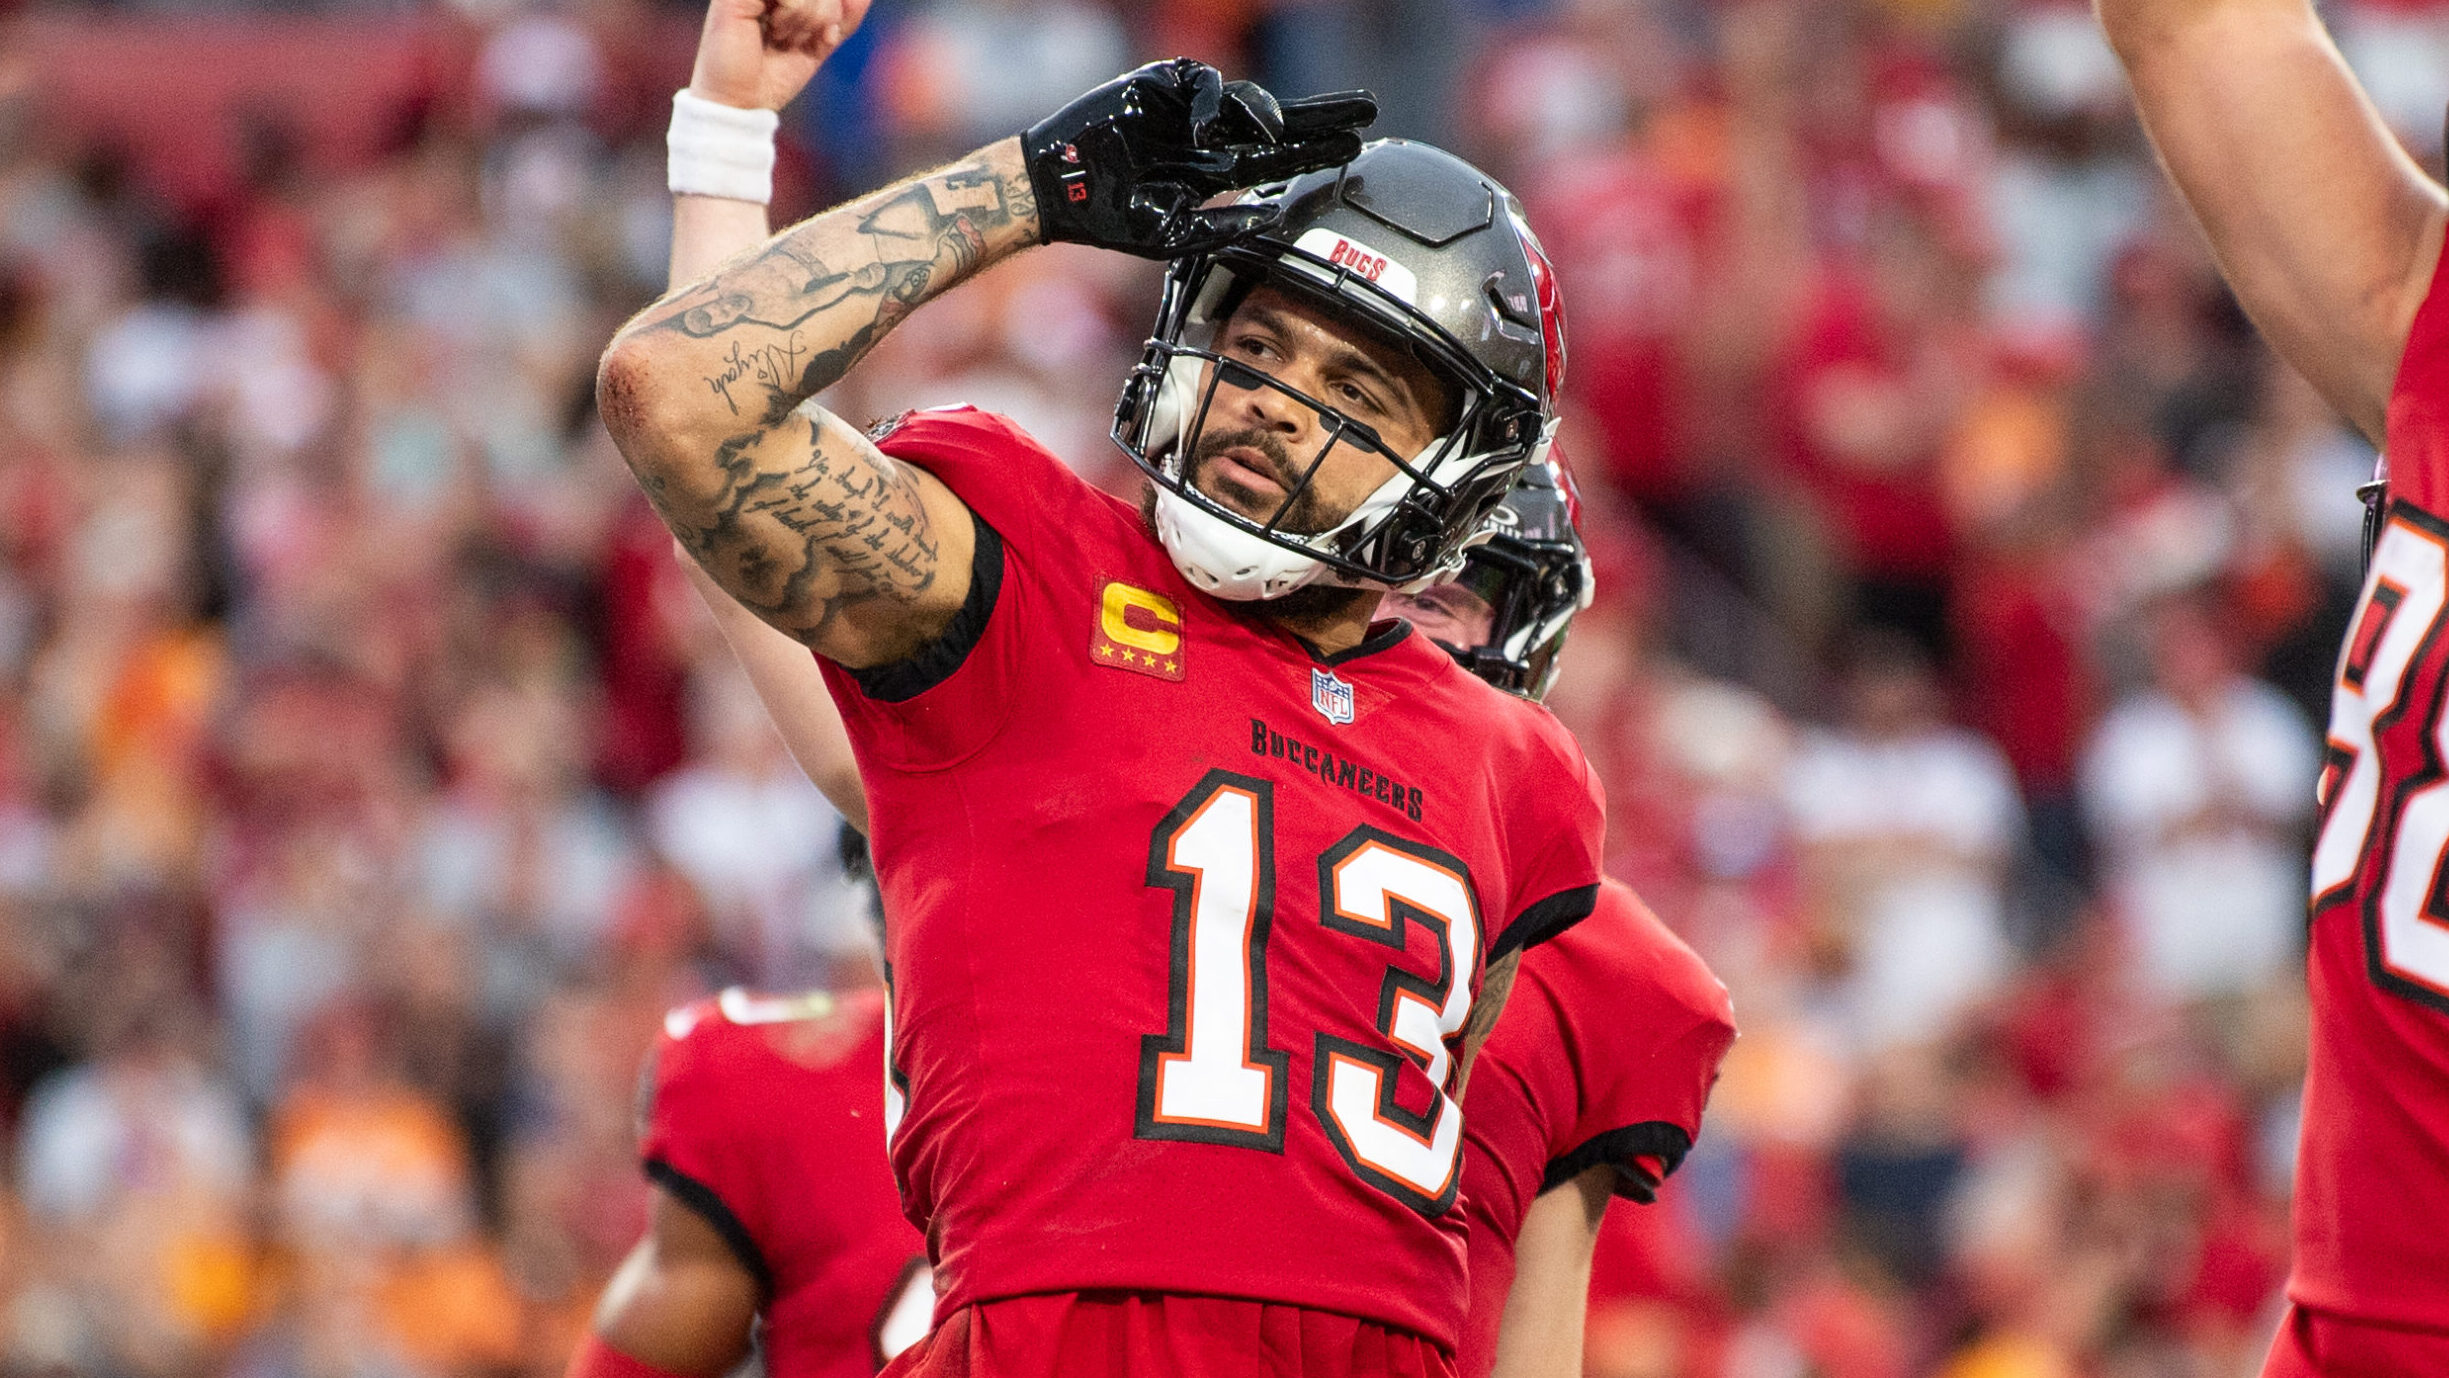 Buccaneers WR Mike Evans gives a salute as a celebration